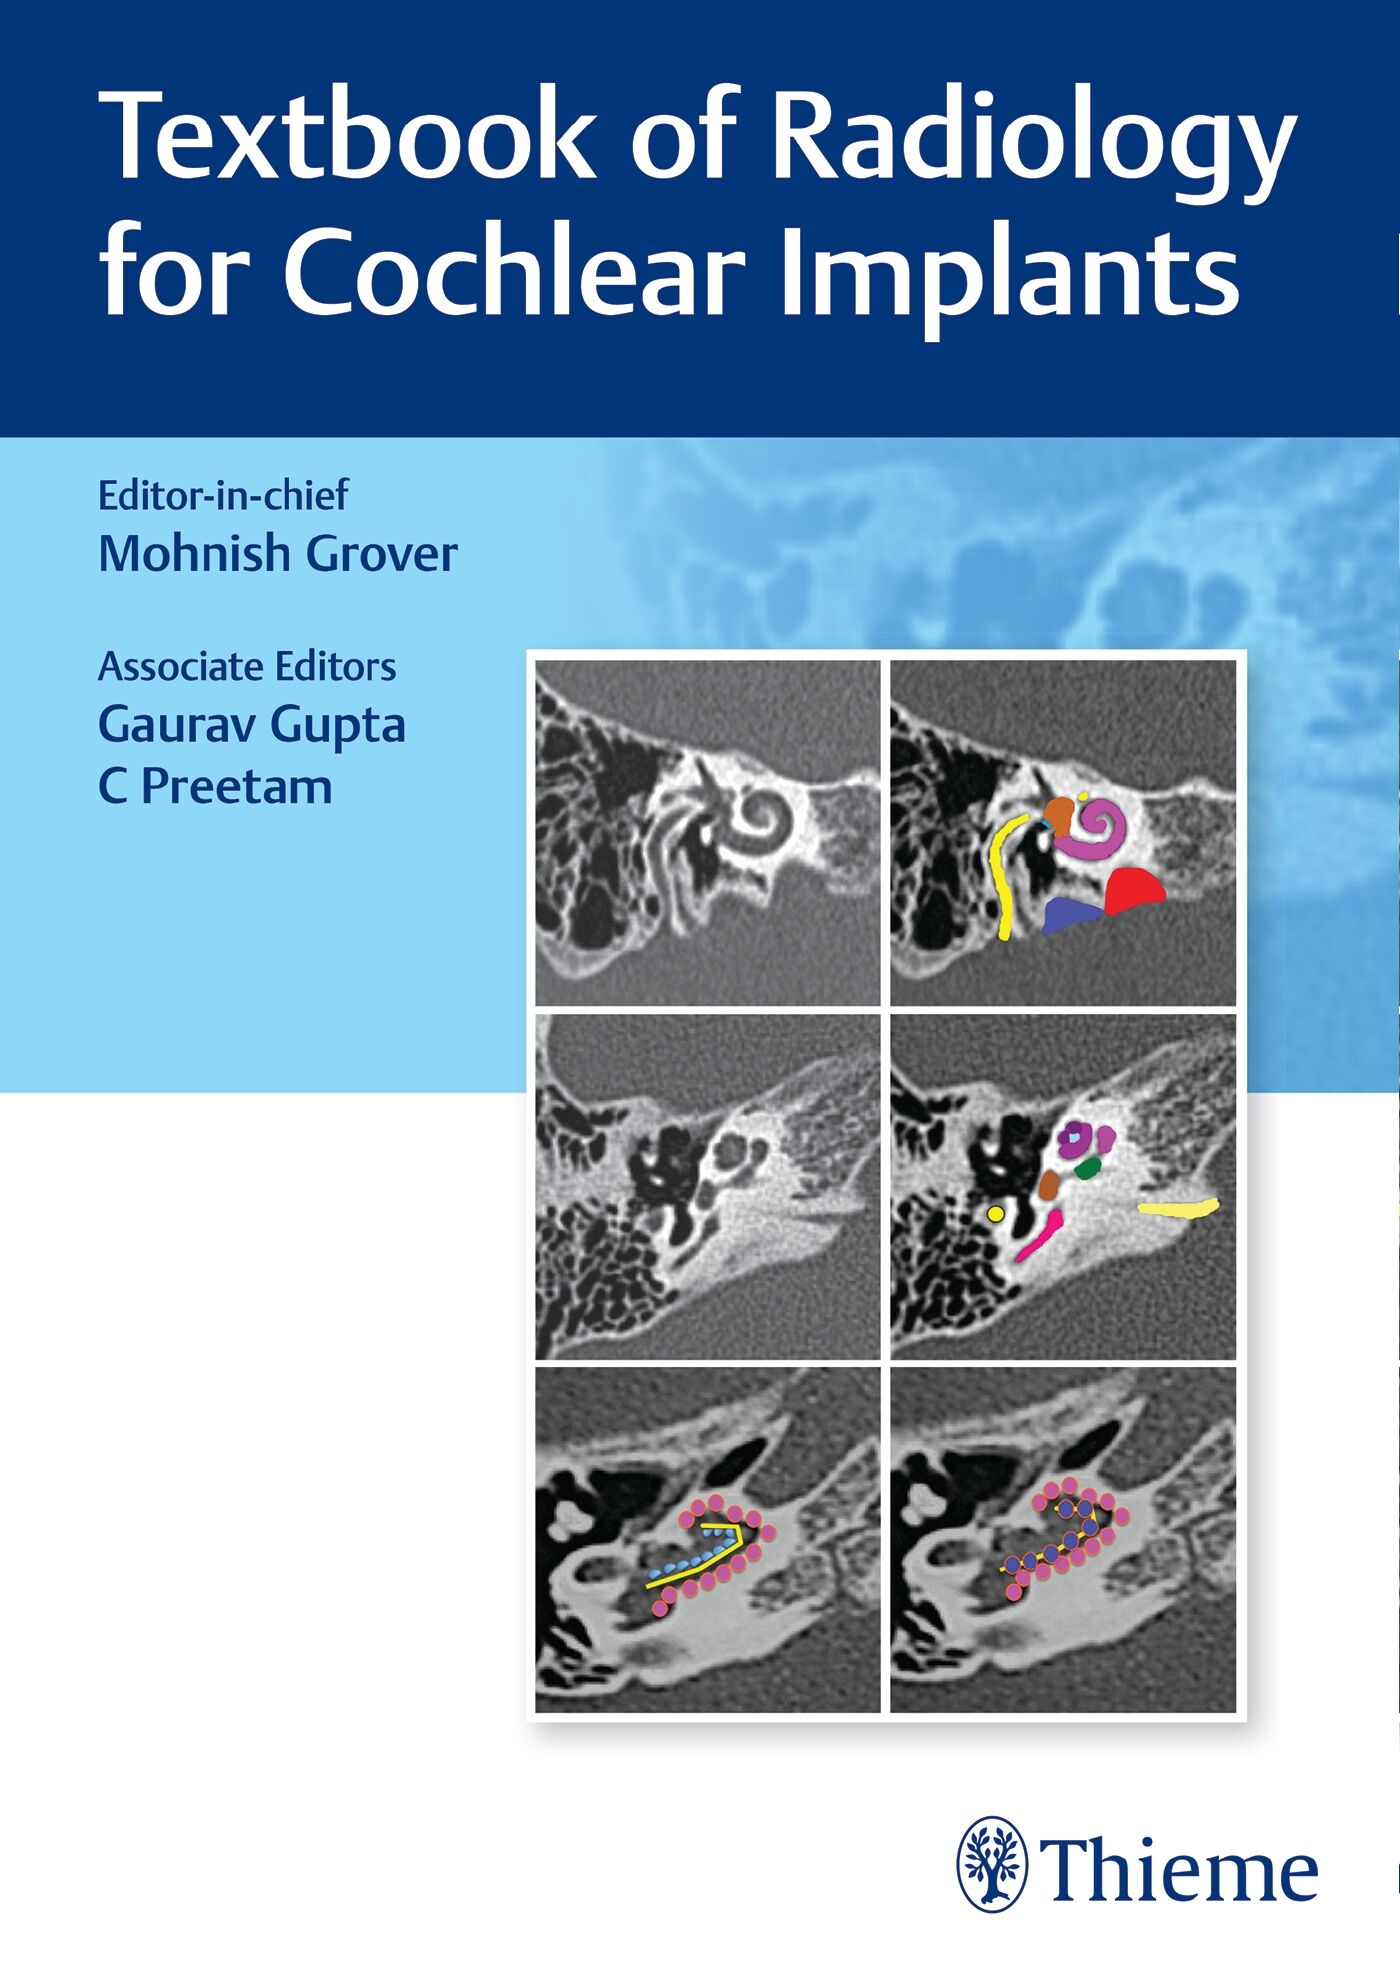 Textbook of Radiology for Cochlear Implants, 9789392819292